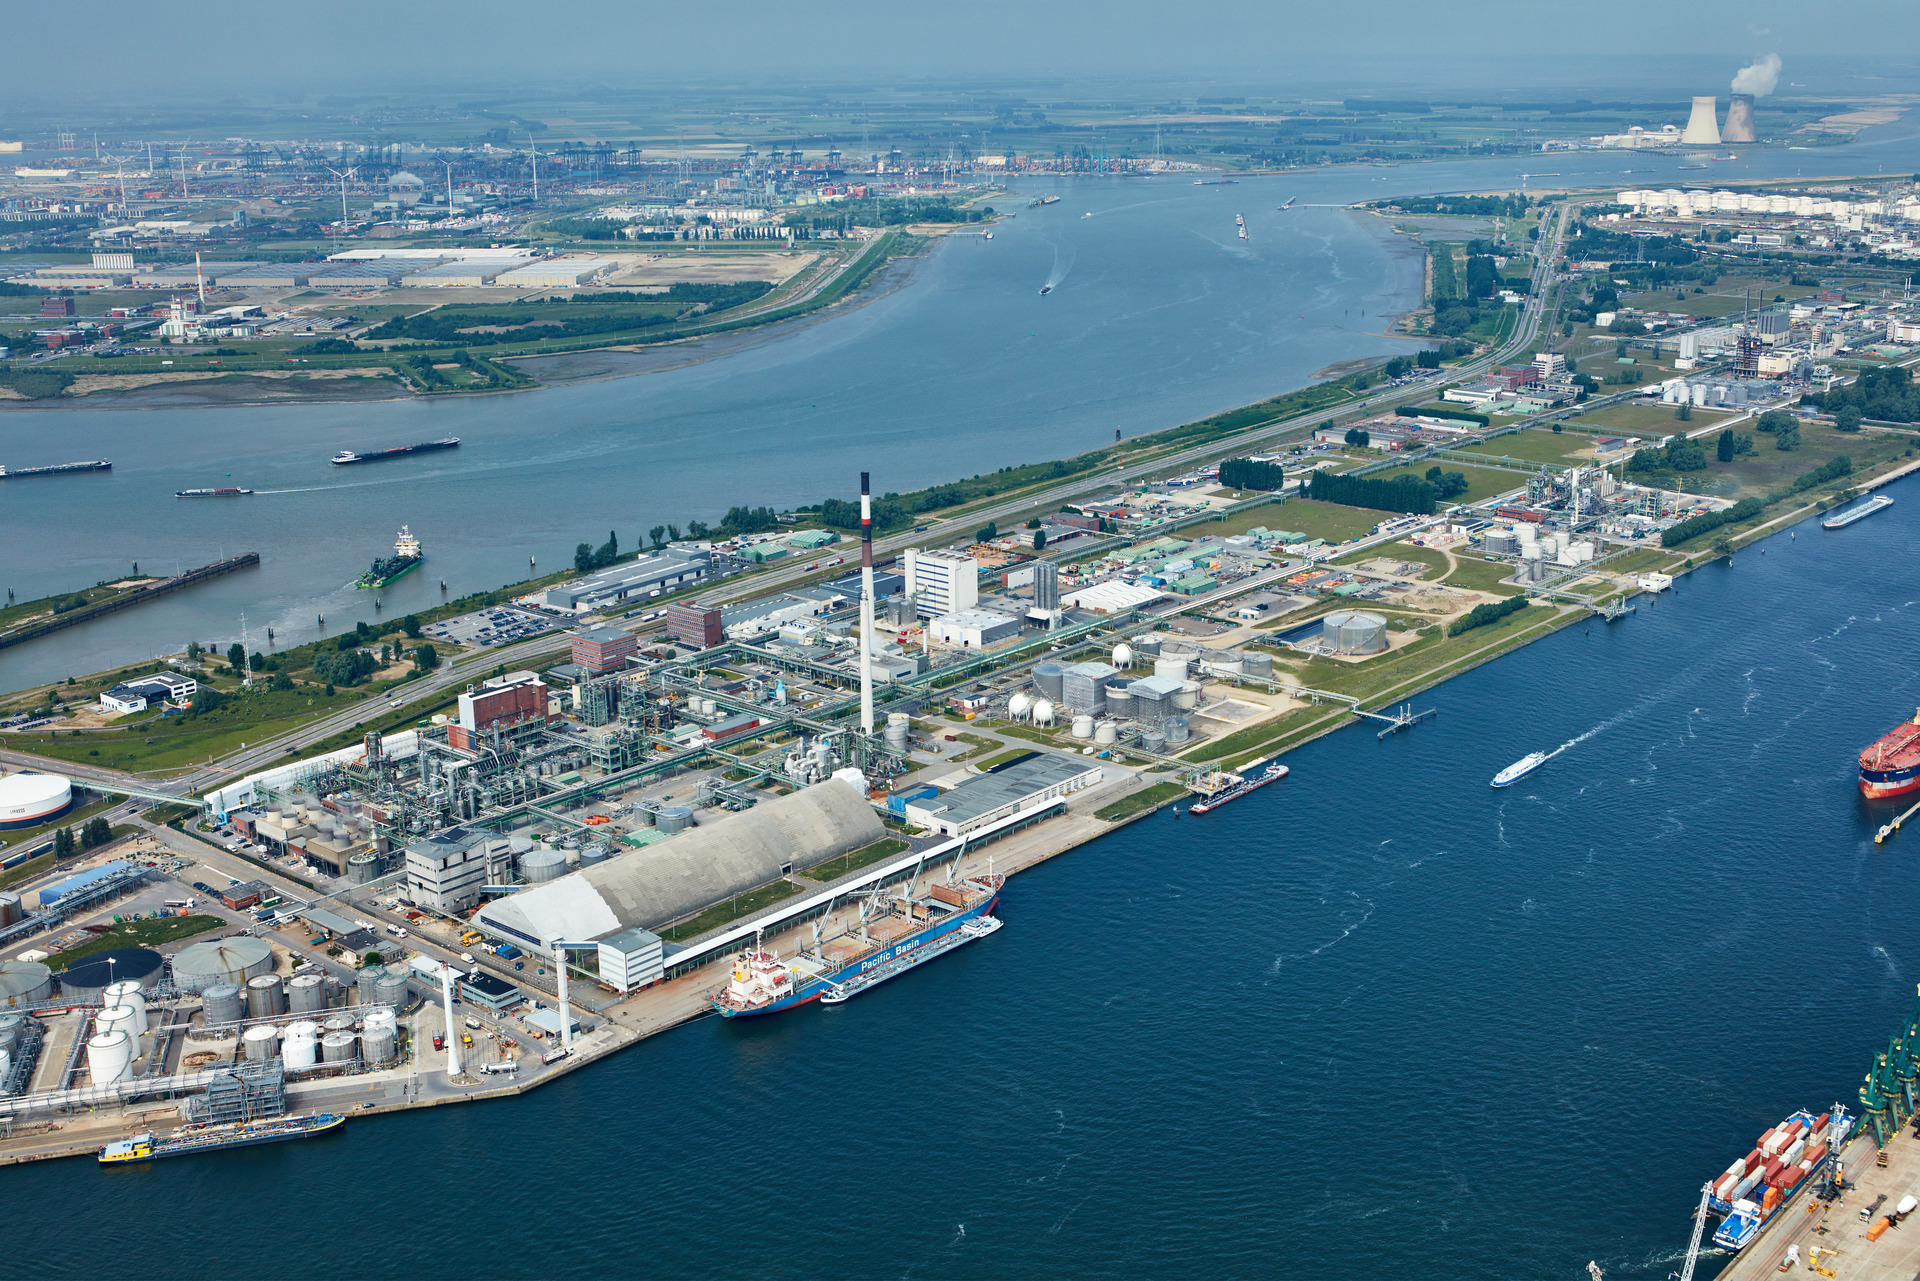 Aerial view over Lillo / Antwerp and the LANXESS caprolactam complex